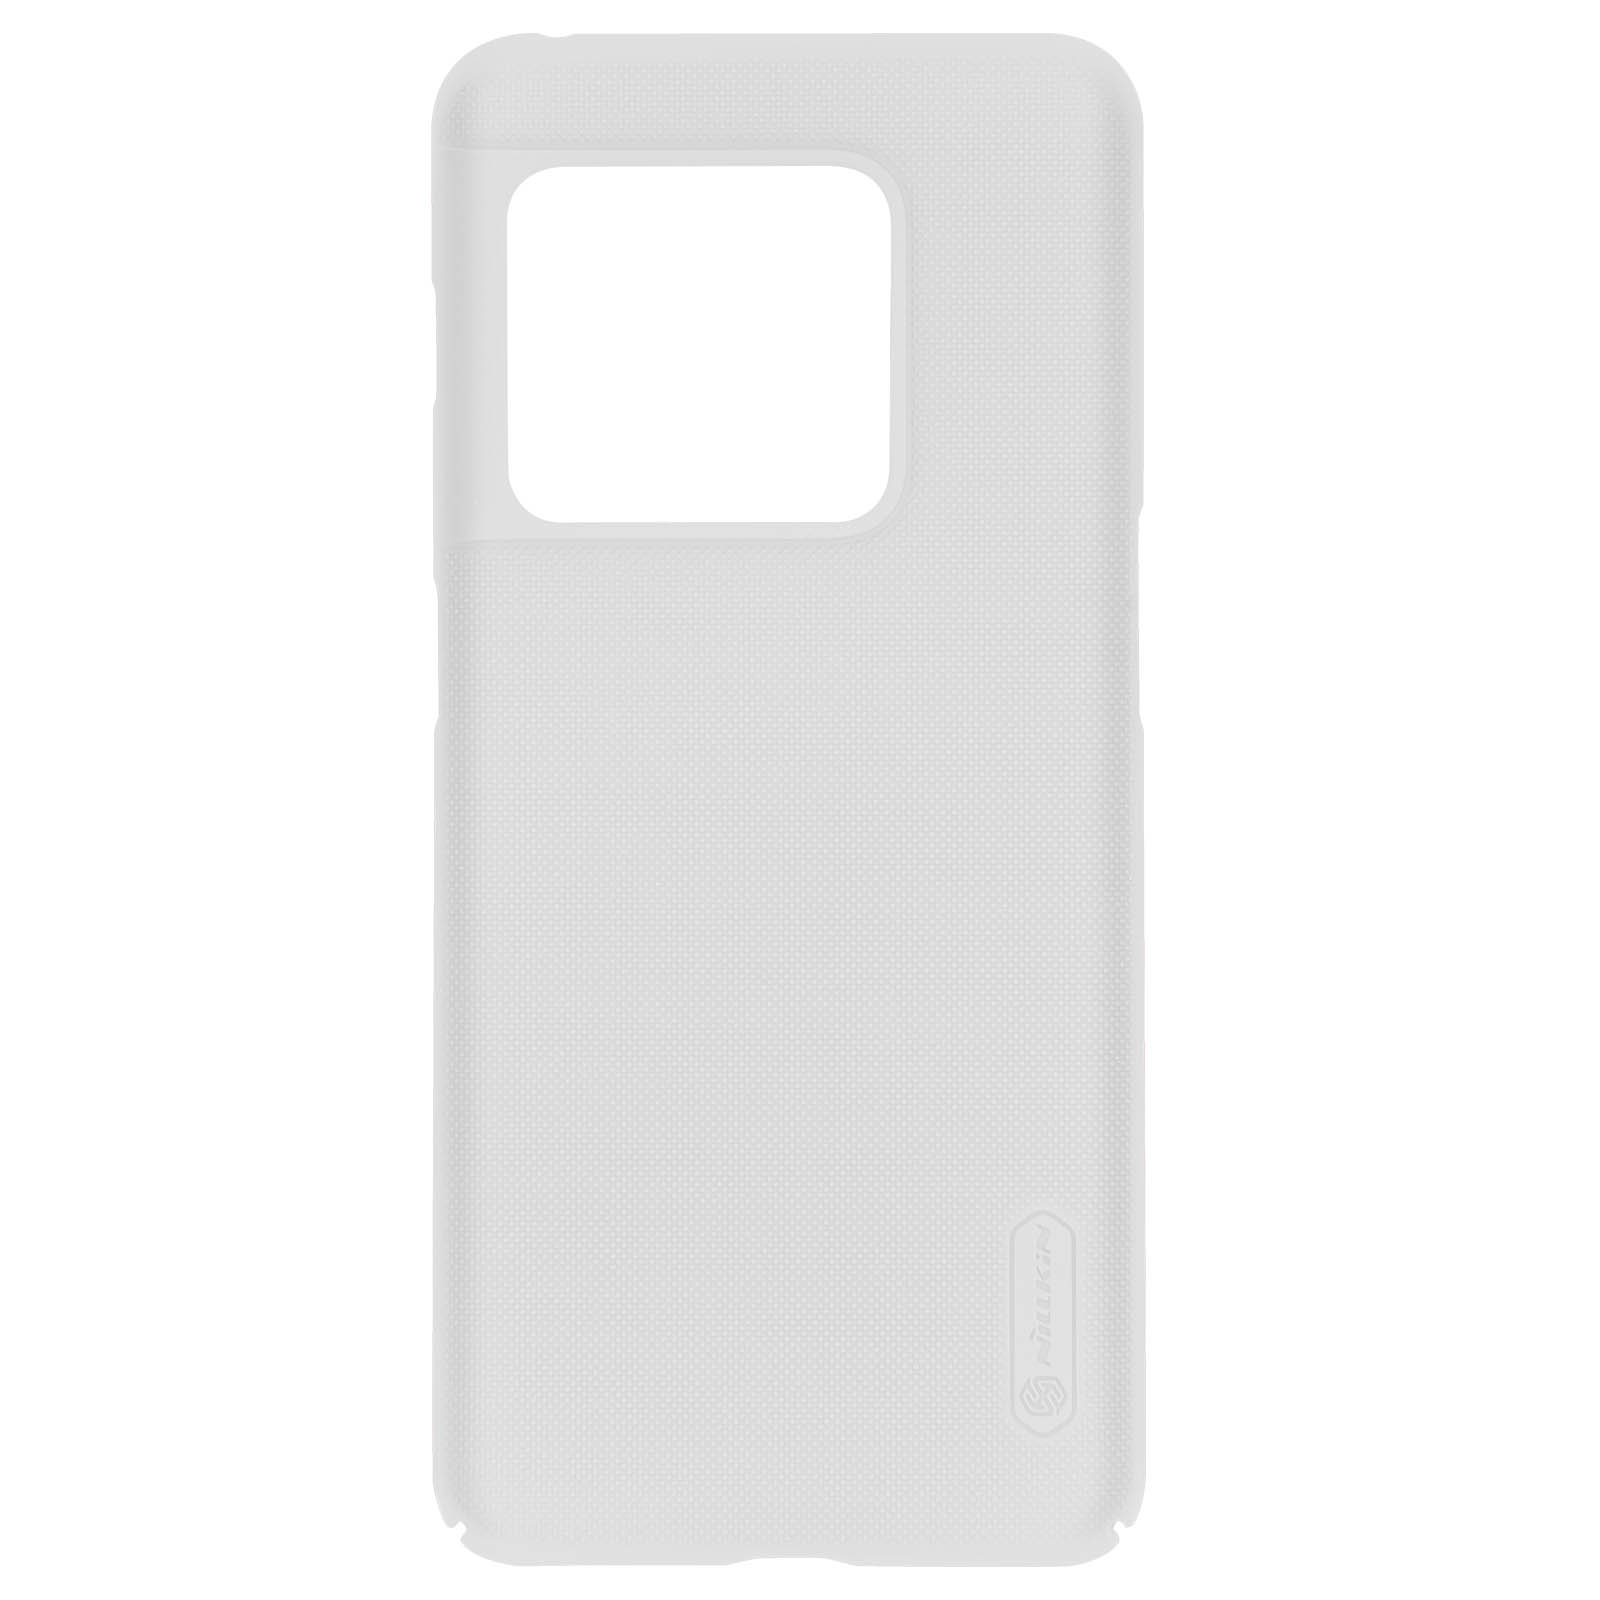 5G, Weiß Series, NILLKIN Touch Pro Soft OnePlus, 10 Backcover,